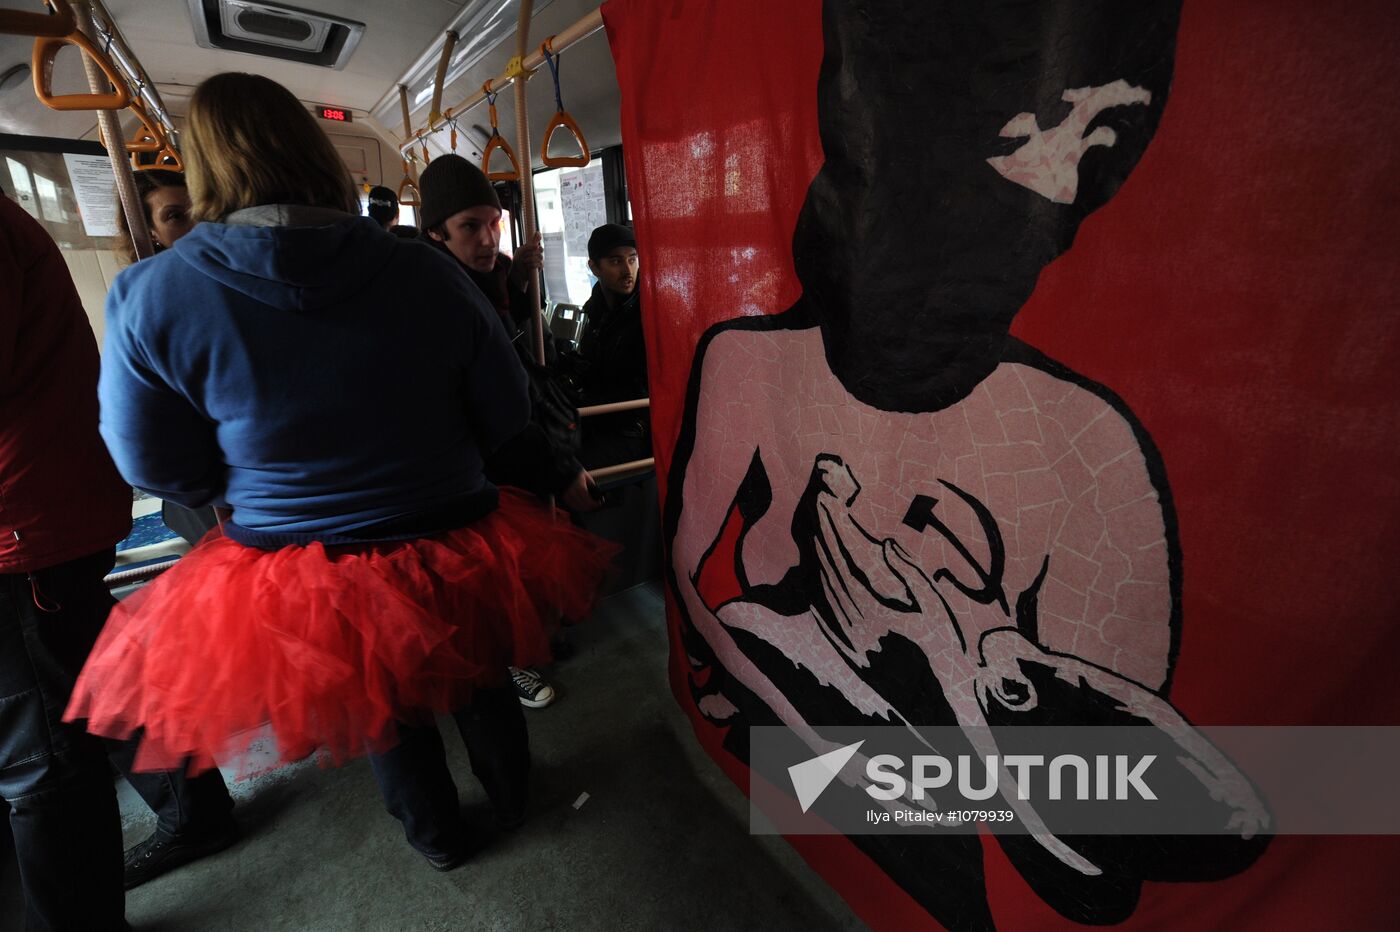 Party Riot Bus campaign in support of the group Pussy Riot